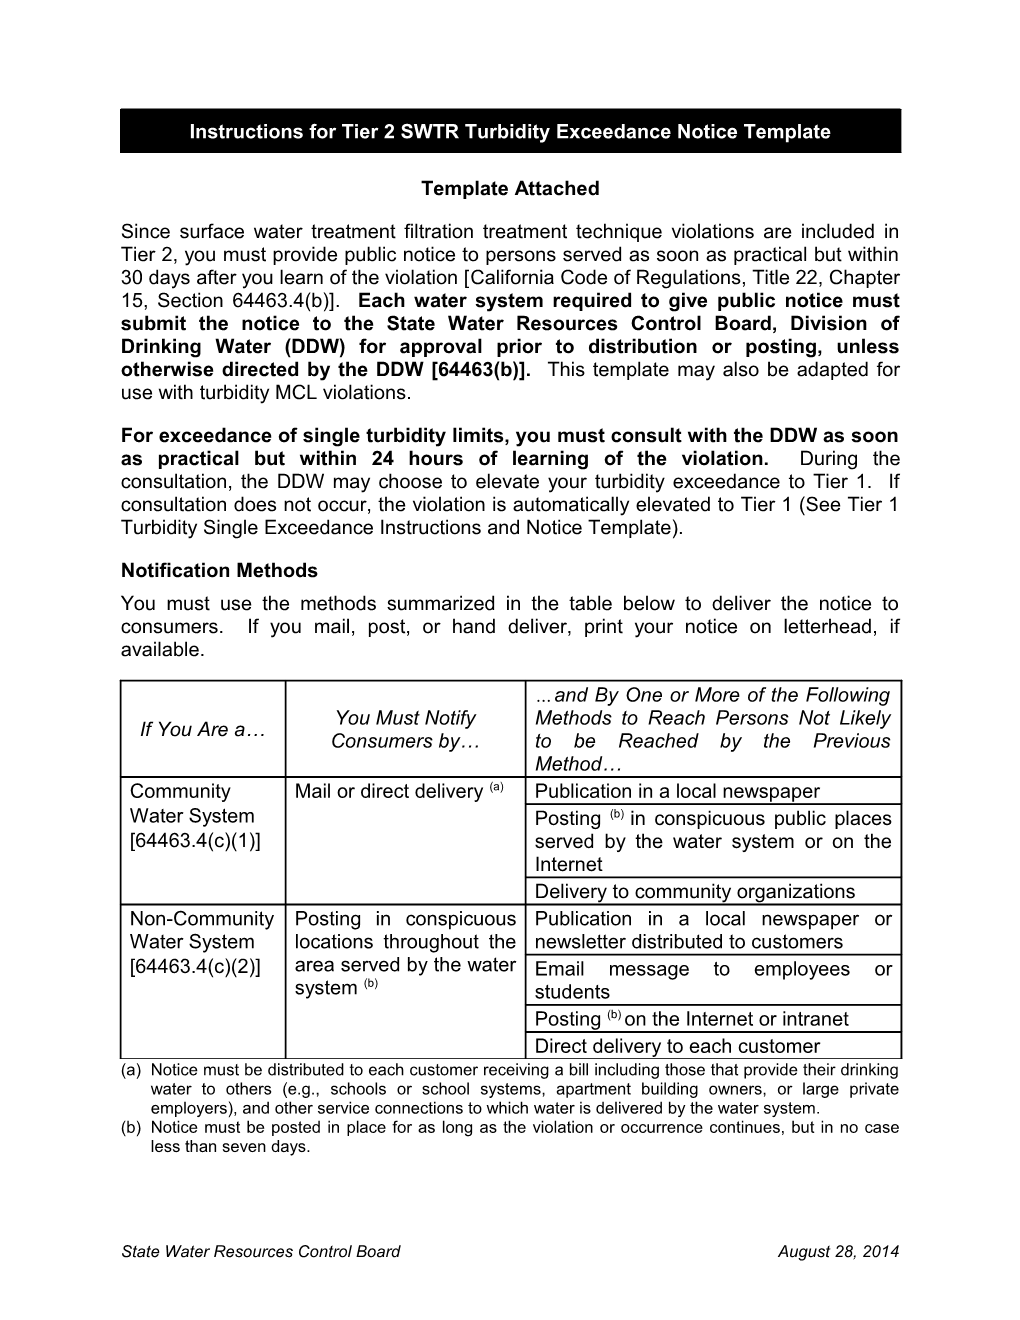 Instructions for SWTR Turbidity Exceedance Notice Template 2 6